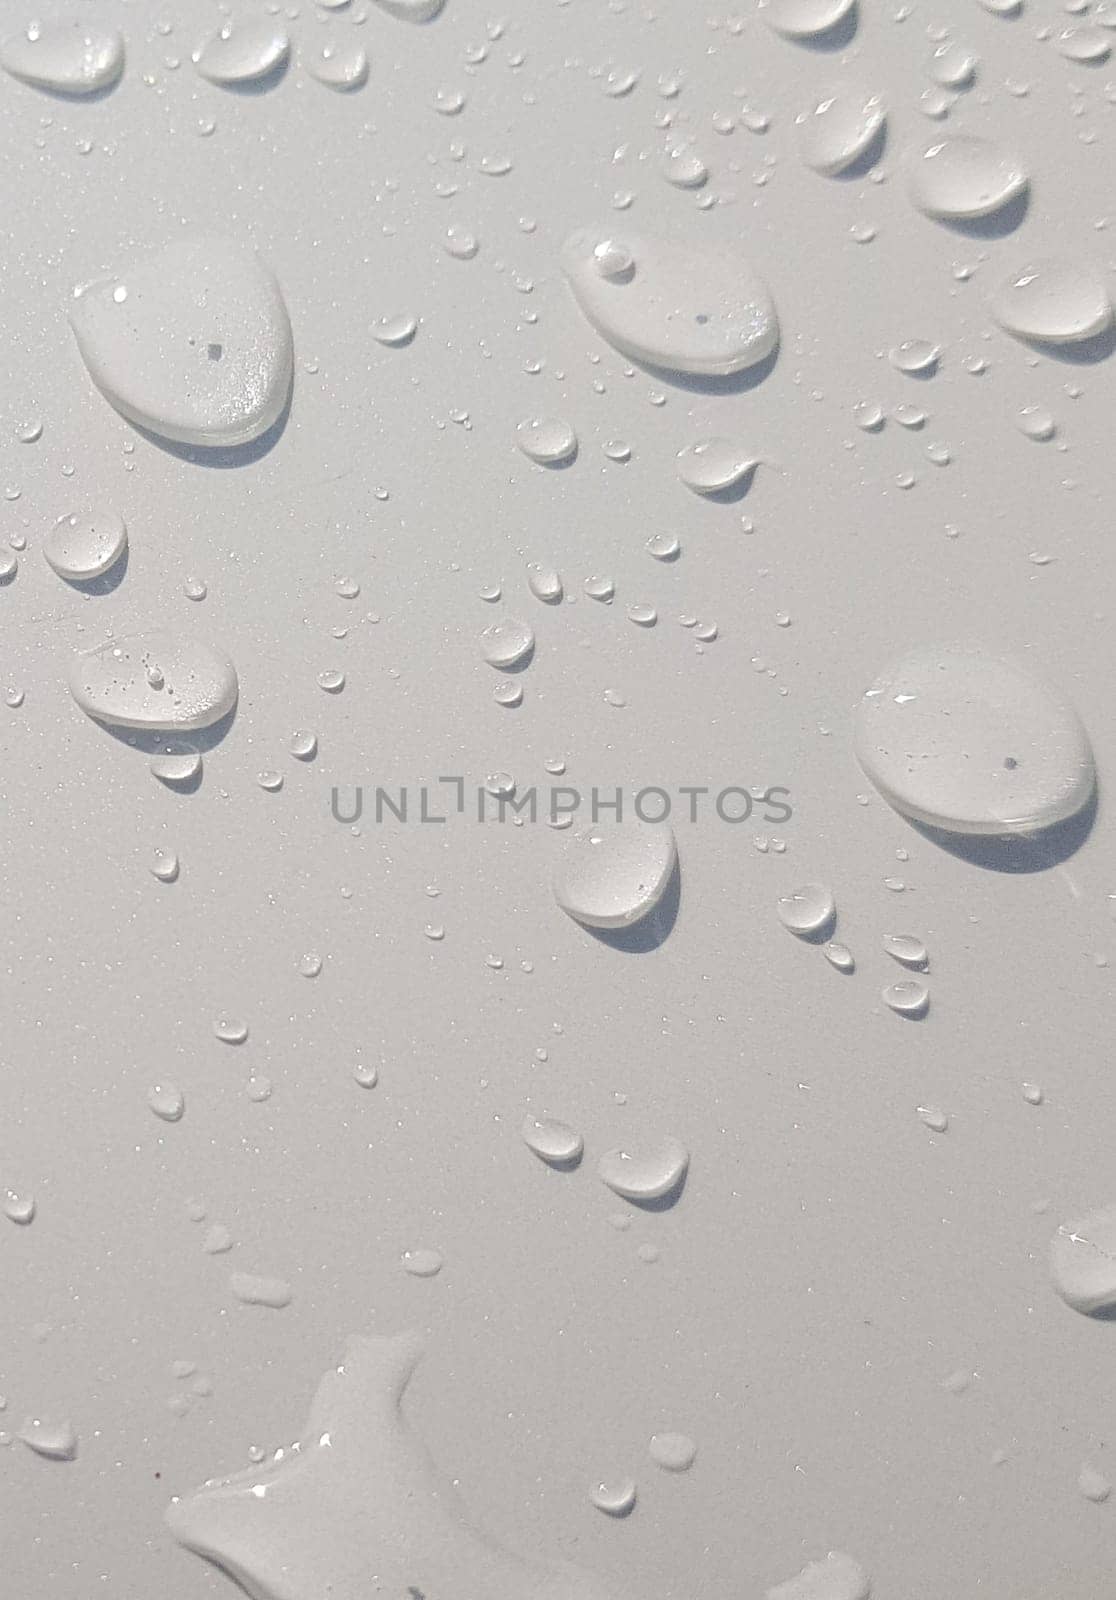 Water droplets perspective through white color surface good for multimedia content backgrounds